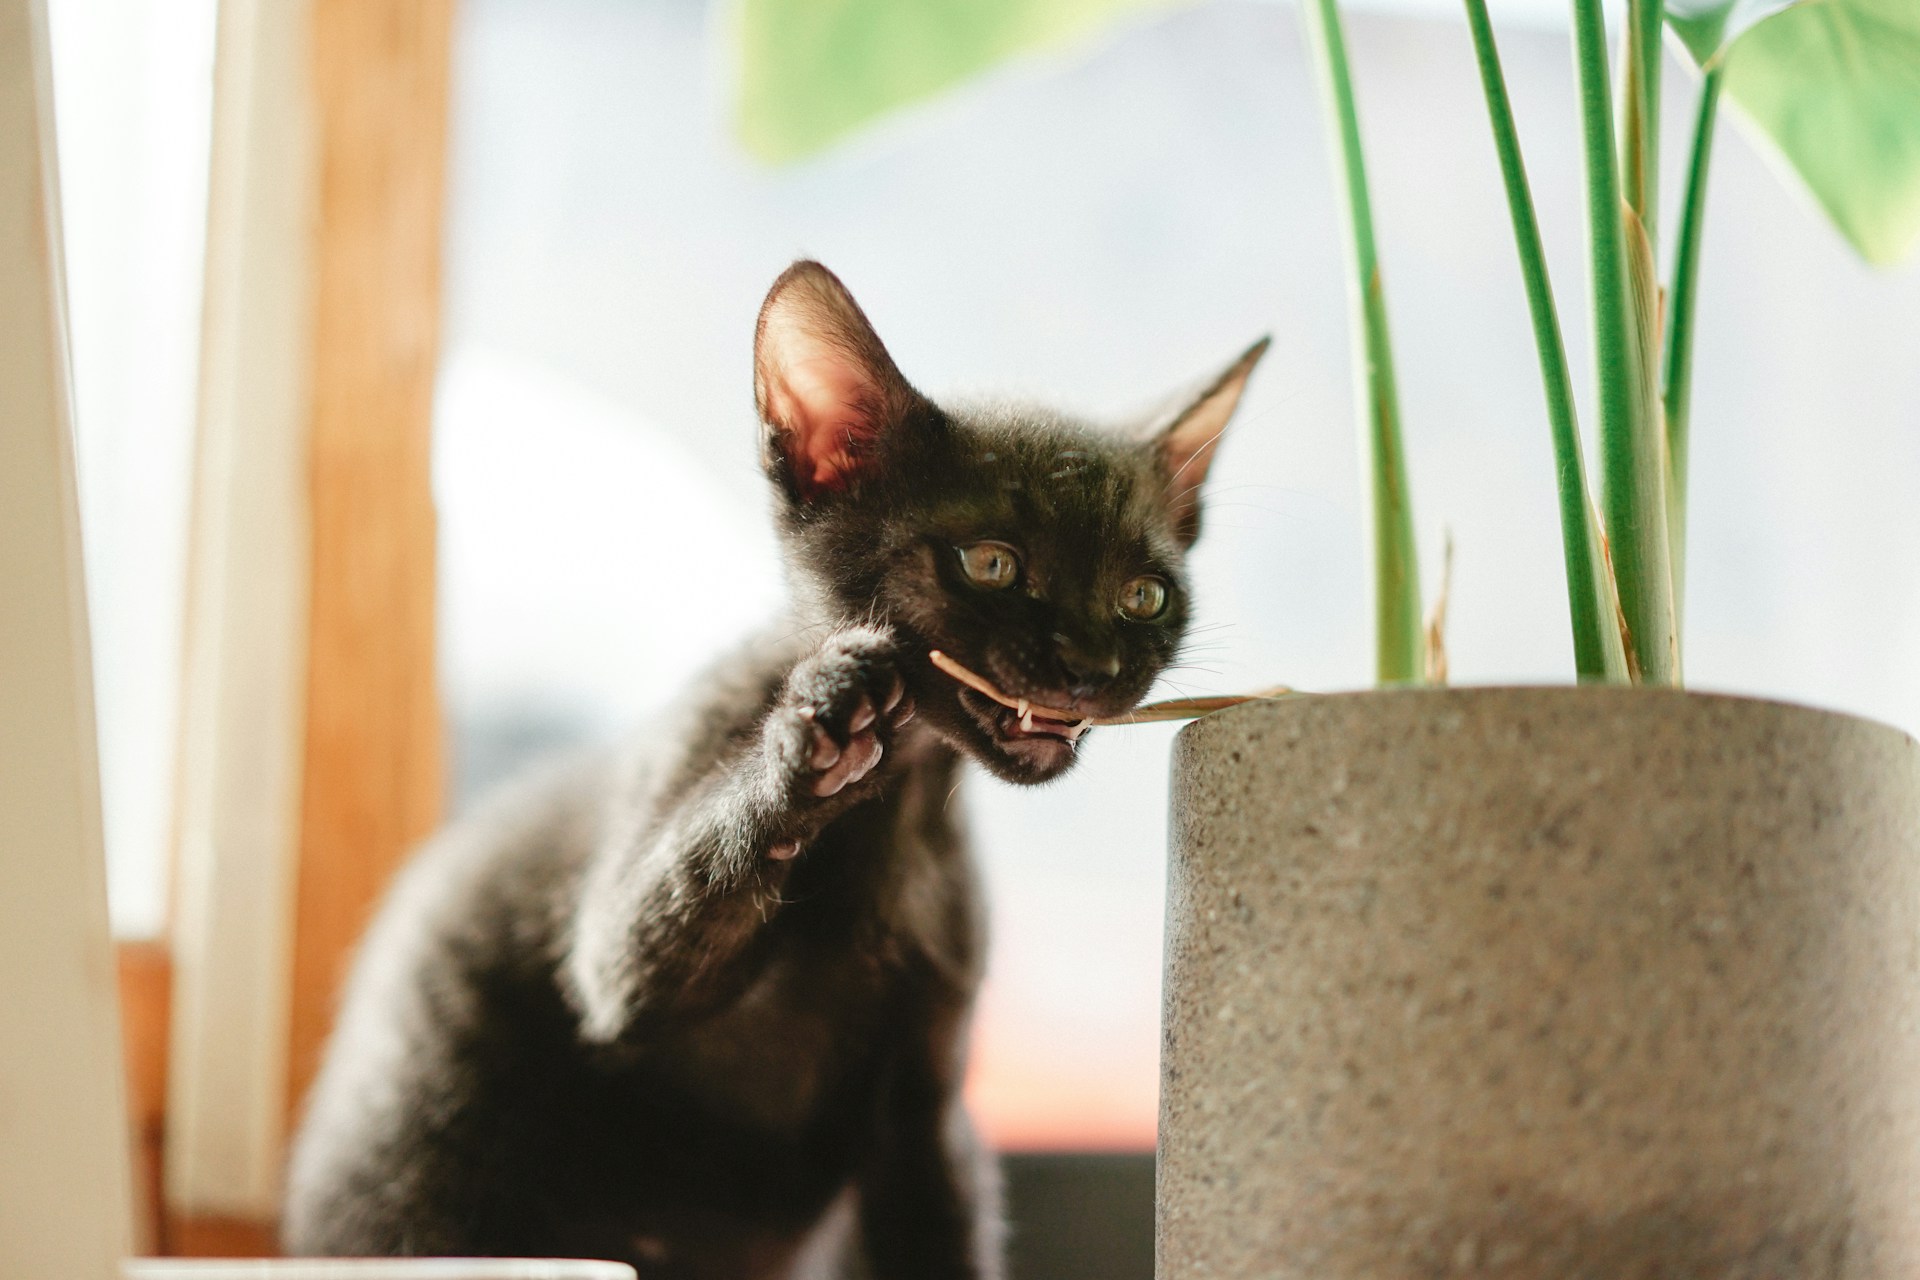 A black kitten taking a bite out of a plant